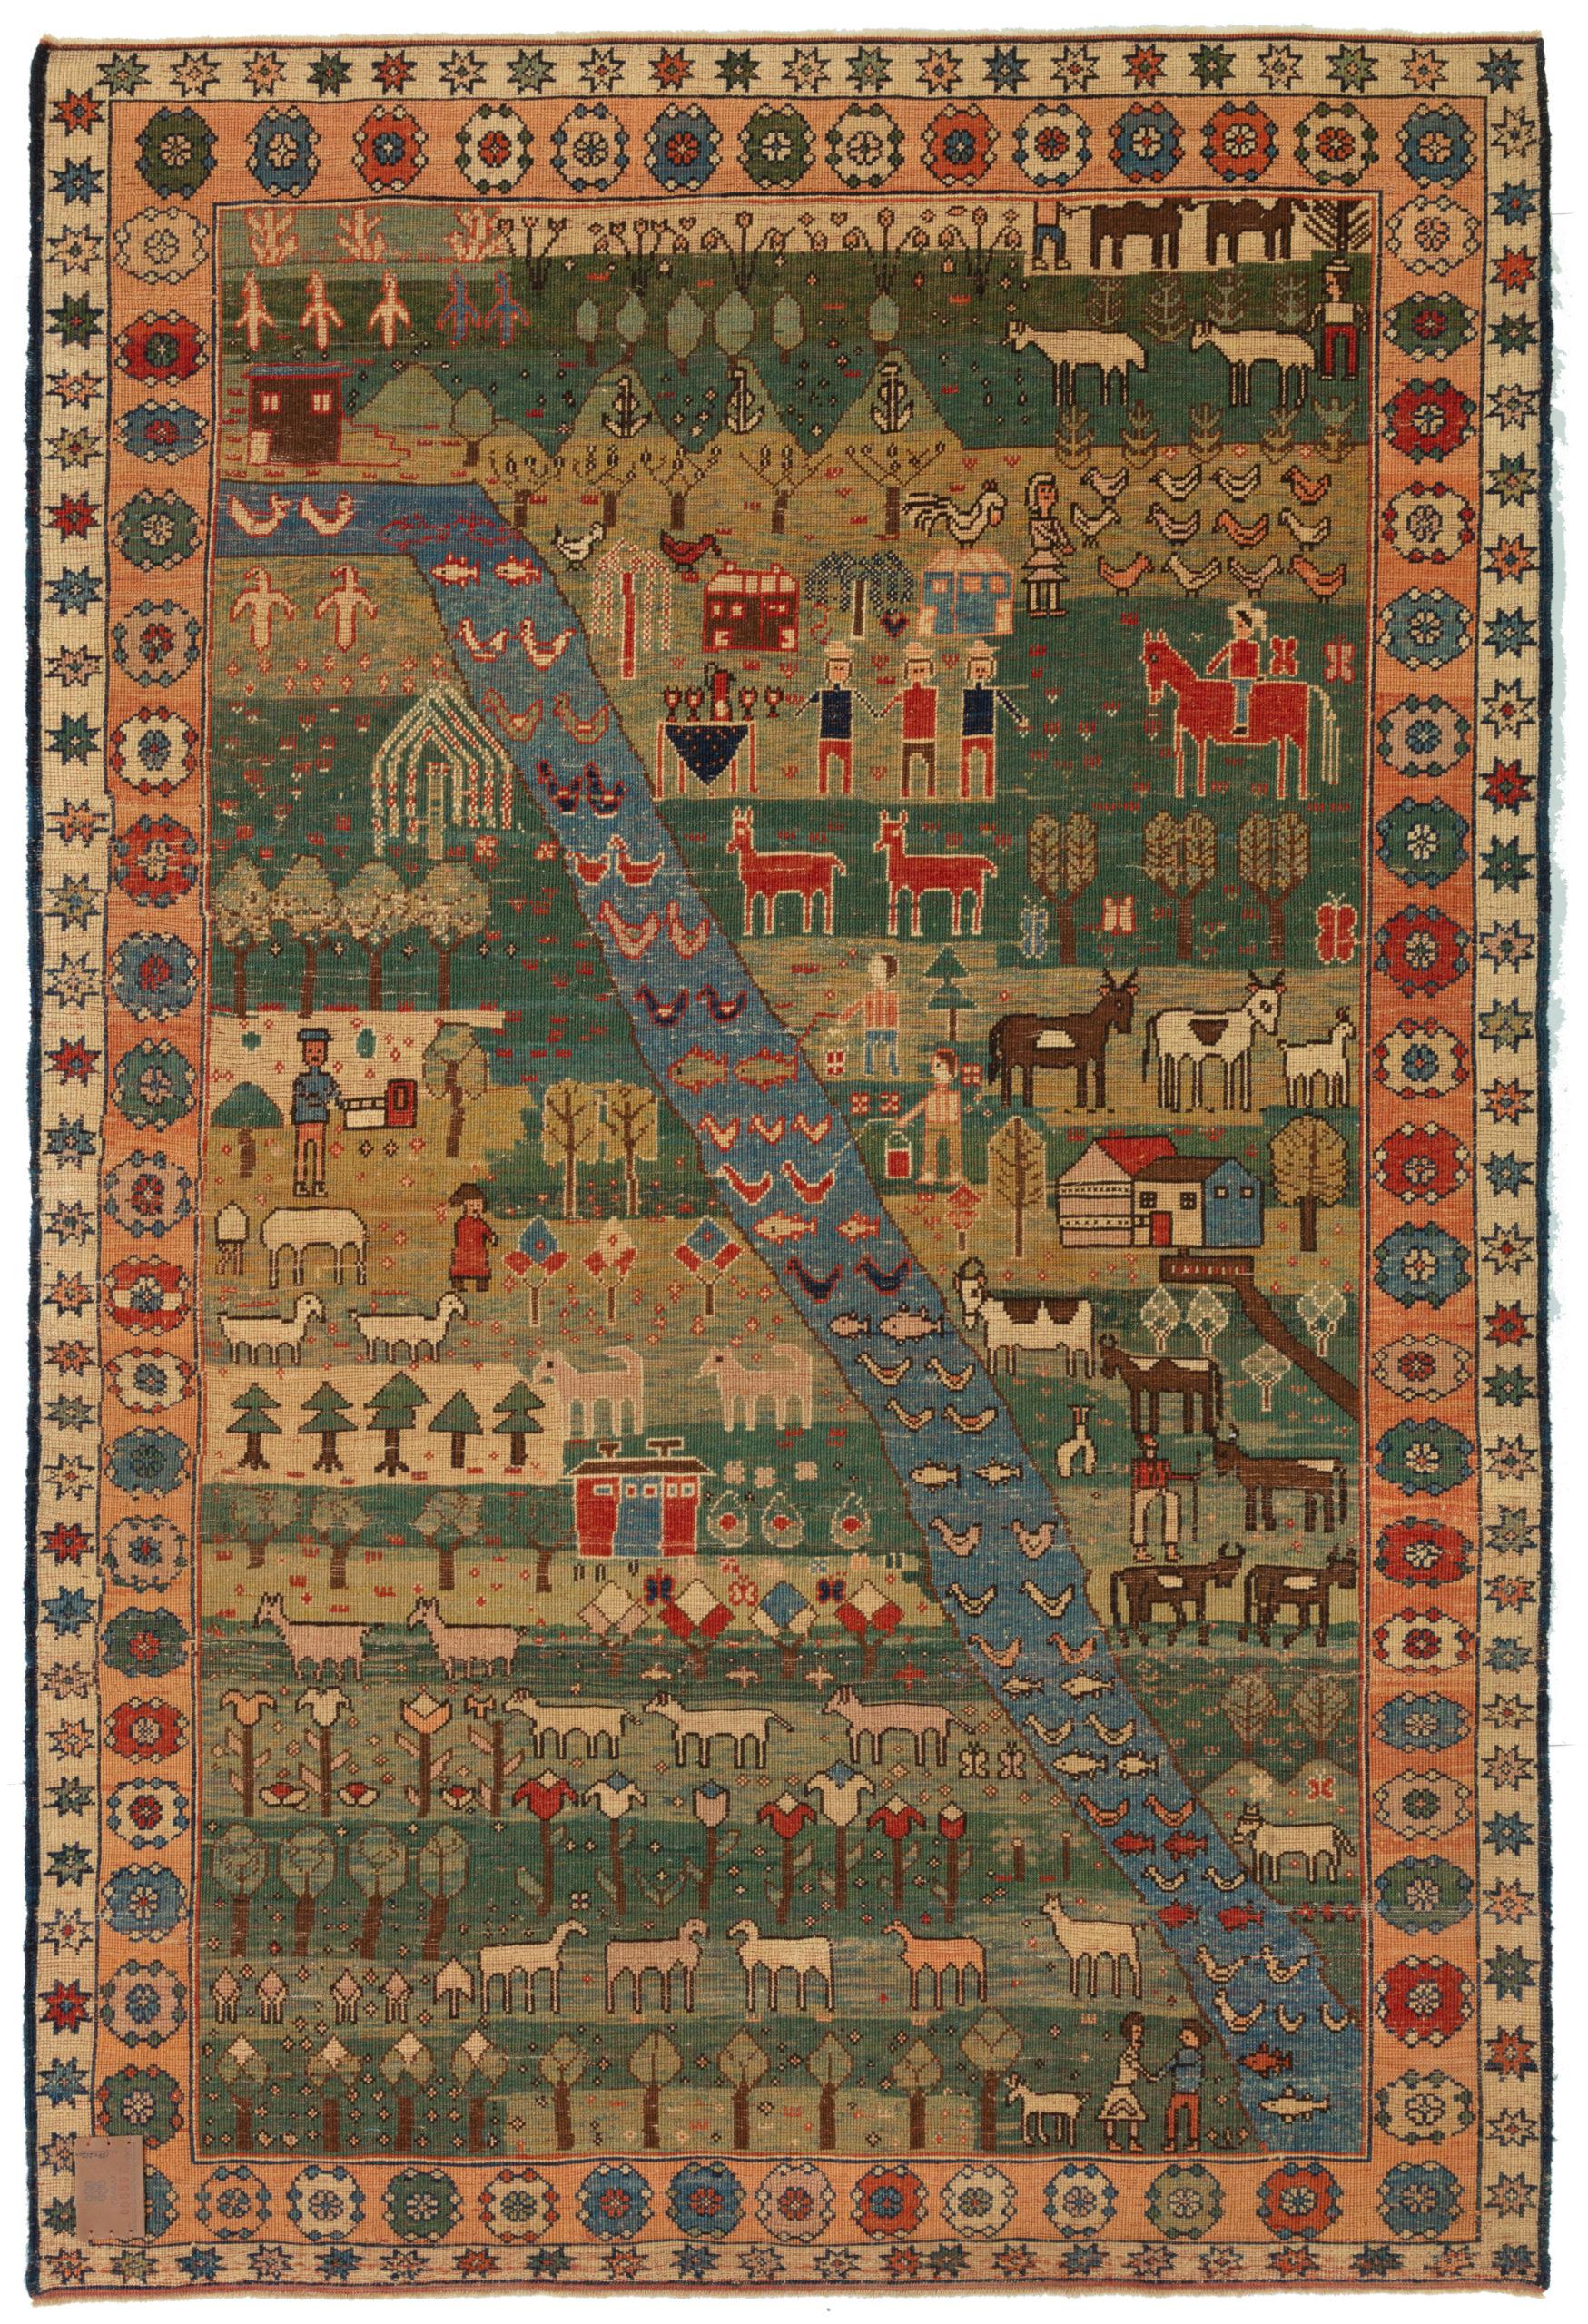 This unique design rug is interpreted by our designers with a composition of pictorial village life.

Color summary:  11 colors in total;
Yellow Green 419 (Henna – Indigo)
Pine Tree  420 (Henna – Indigo)
Natural Wool Color  320 (Specially